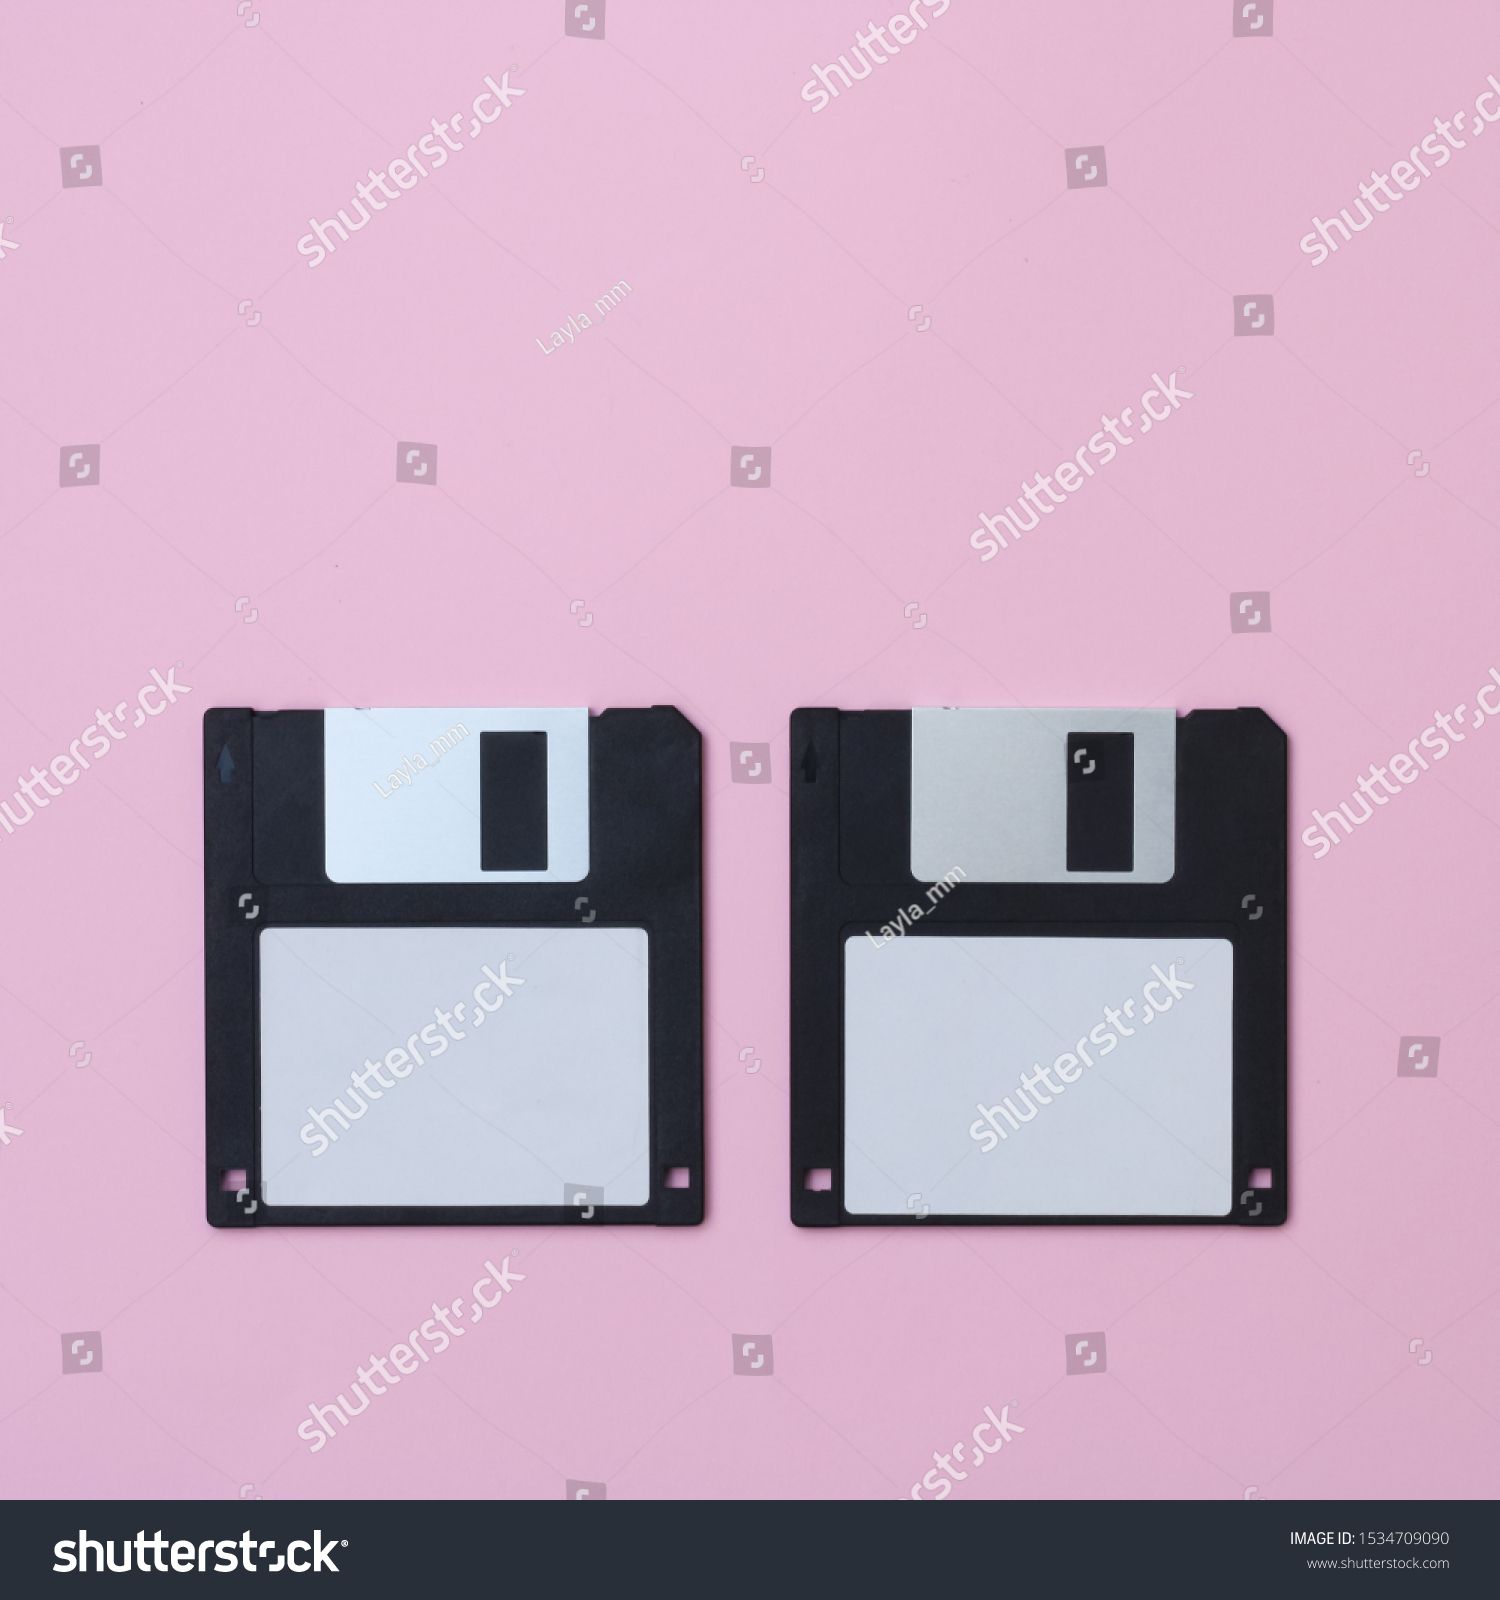 Two black floppy disks on a pink background. #1534709090